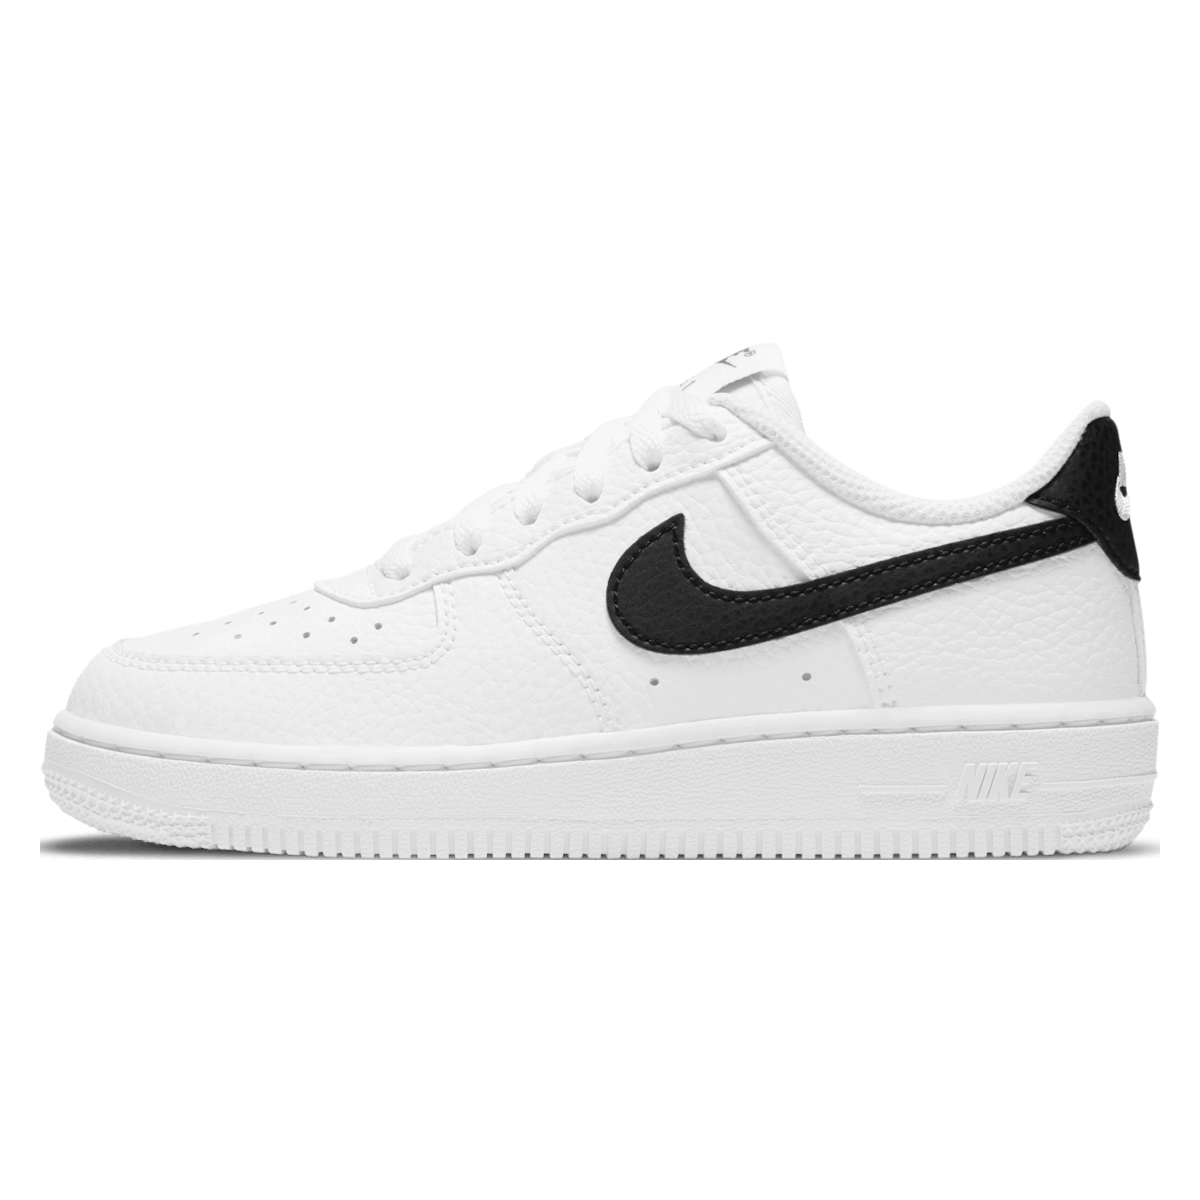 Nike Air Force 1 Low White Black (PS)